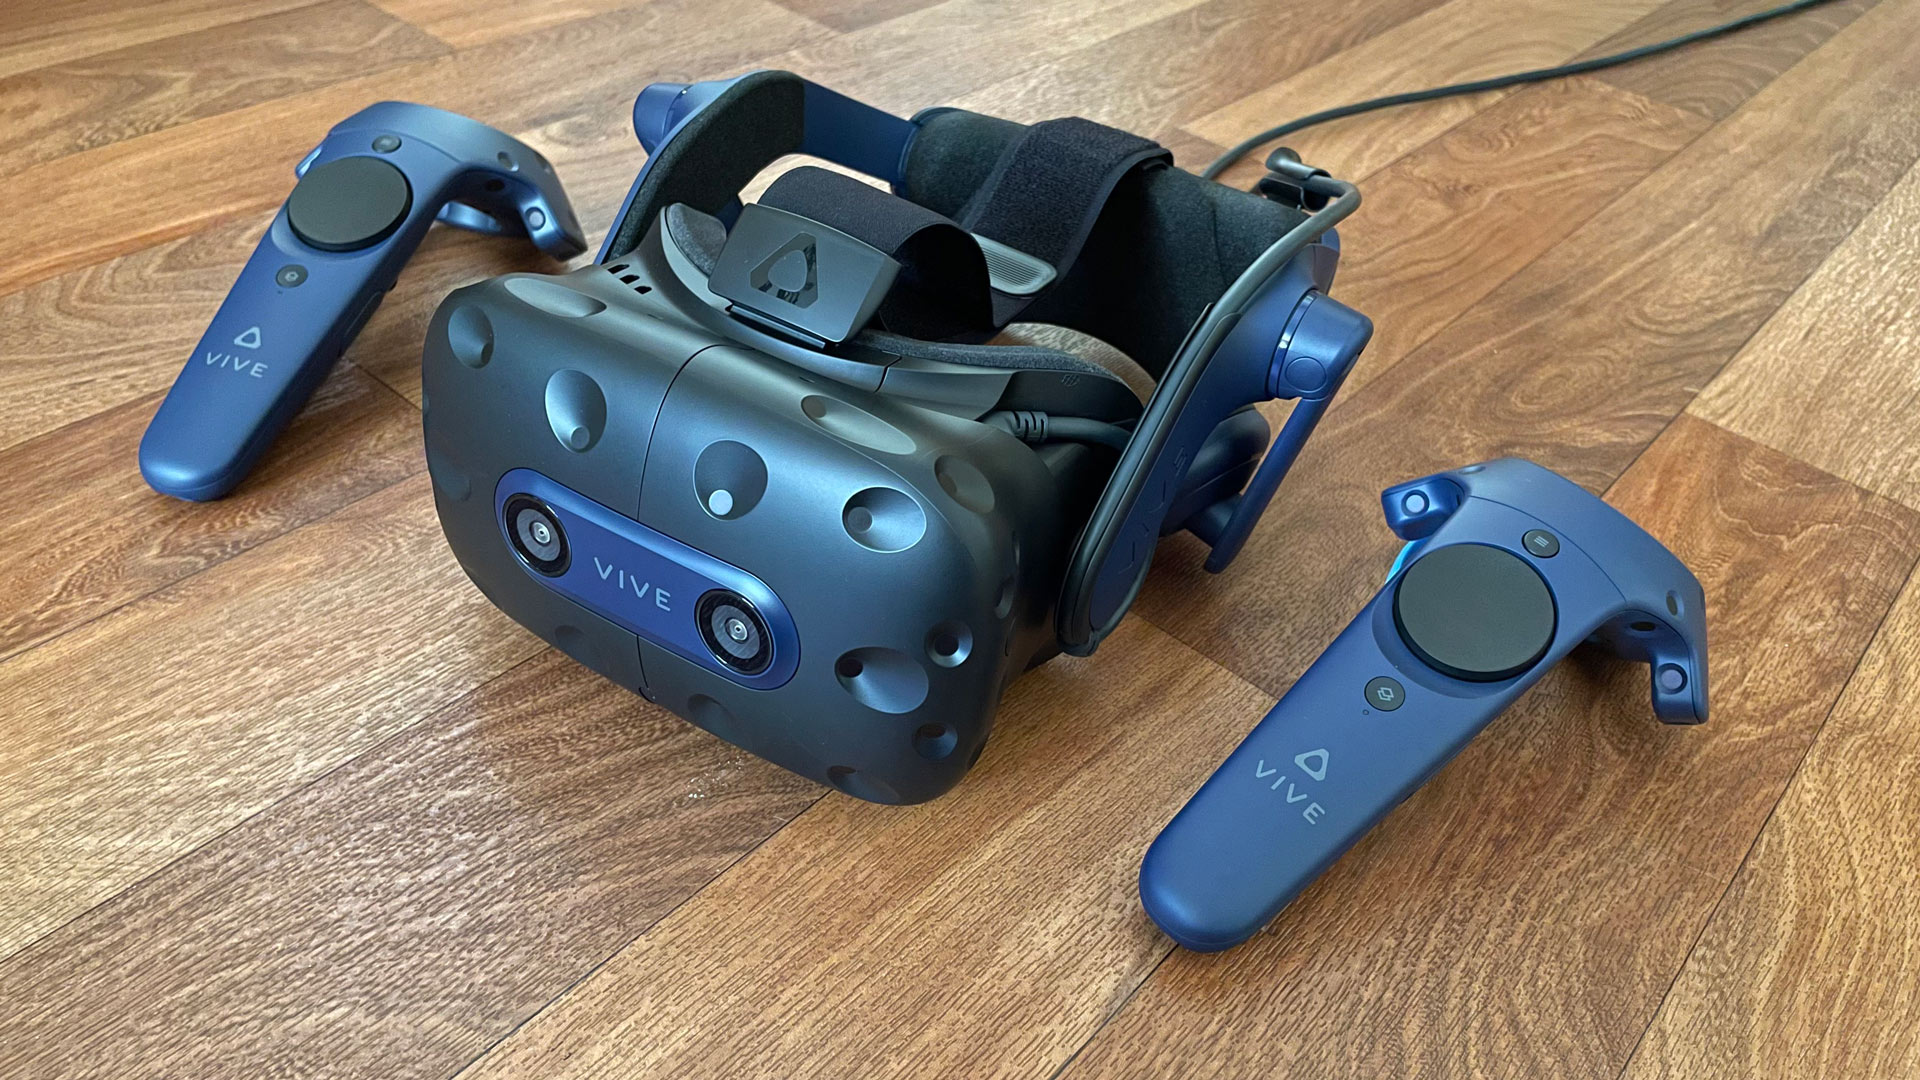 HTC Vive 2 "Pro" Price with Not Quite Pro Performance